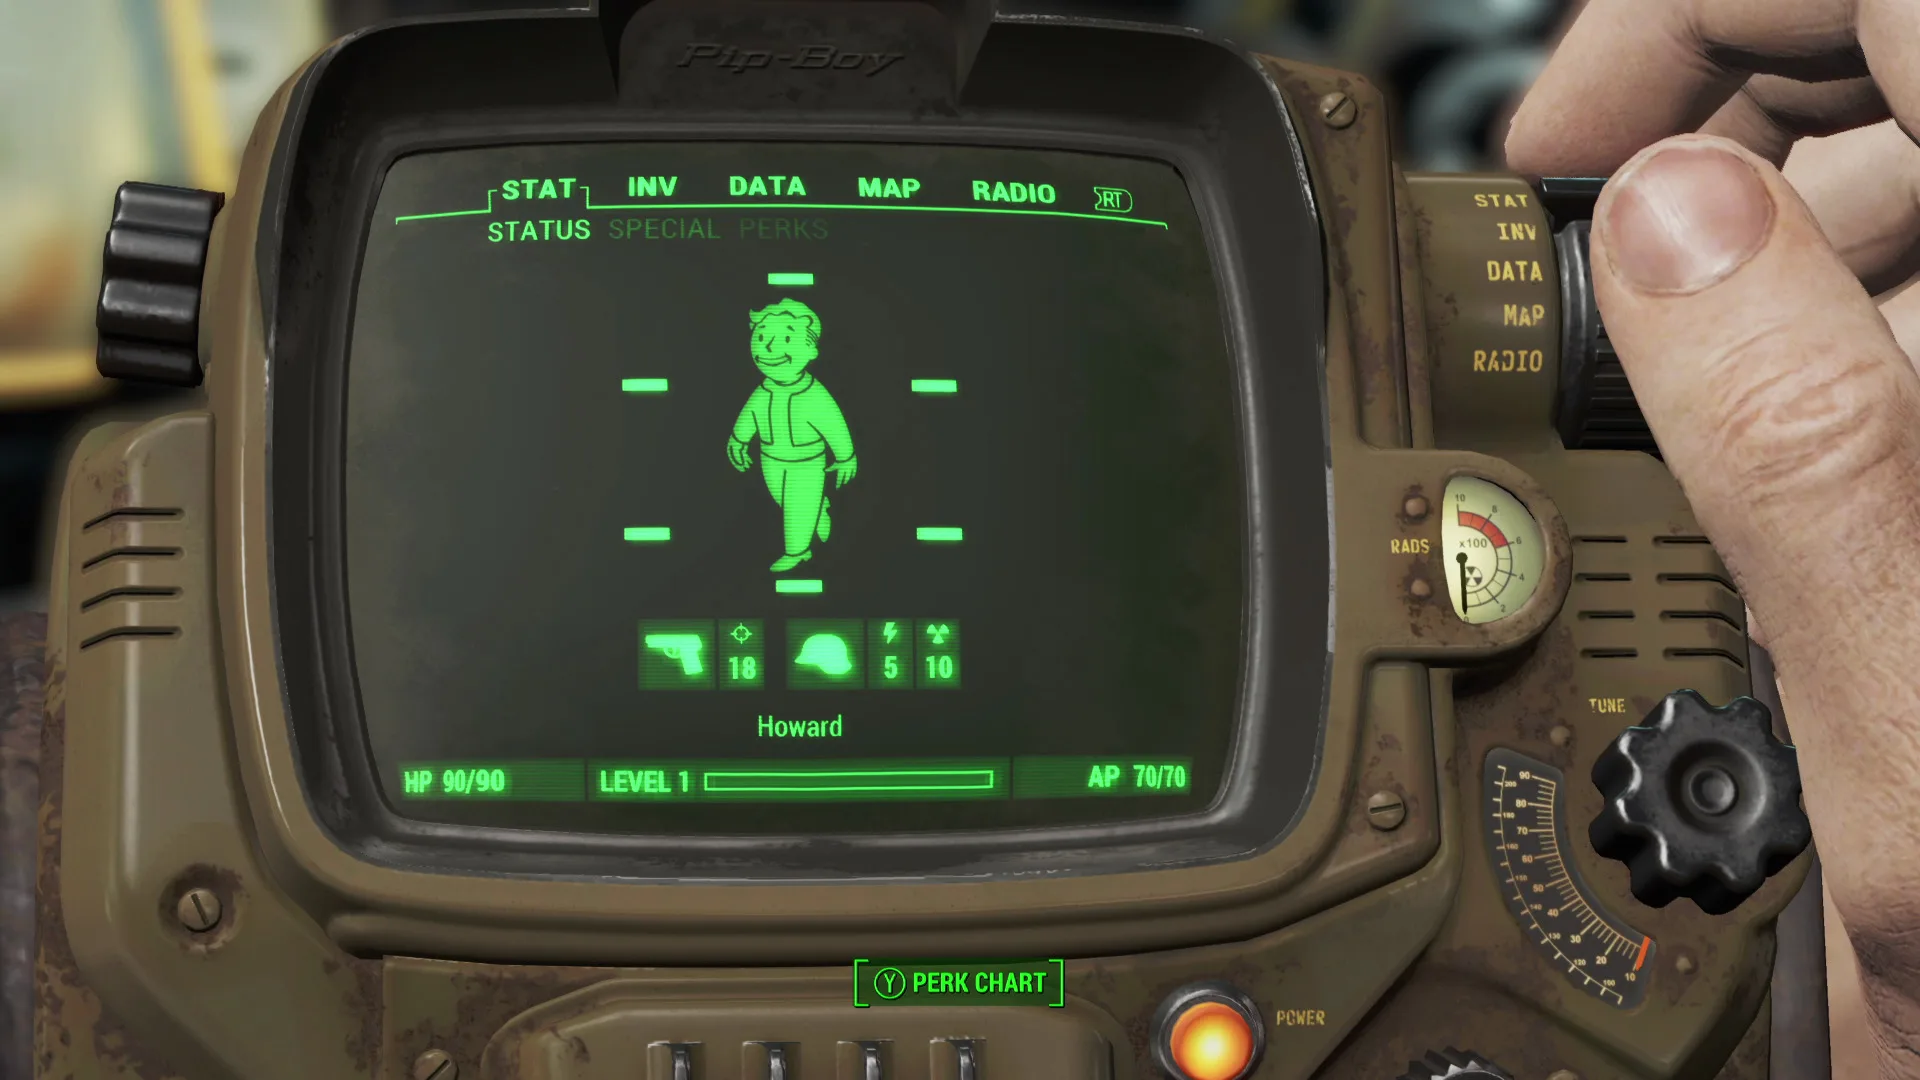 How to Use the console commands when playing Fallout 3 « PC Games